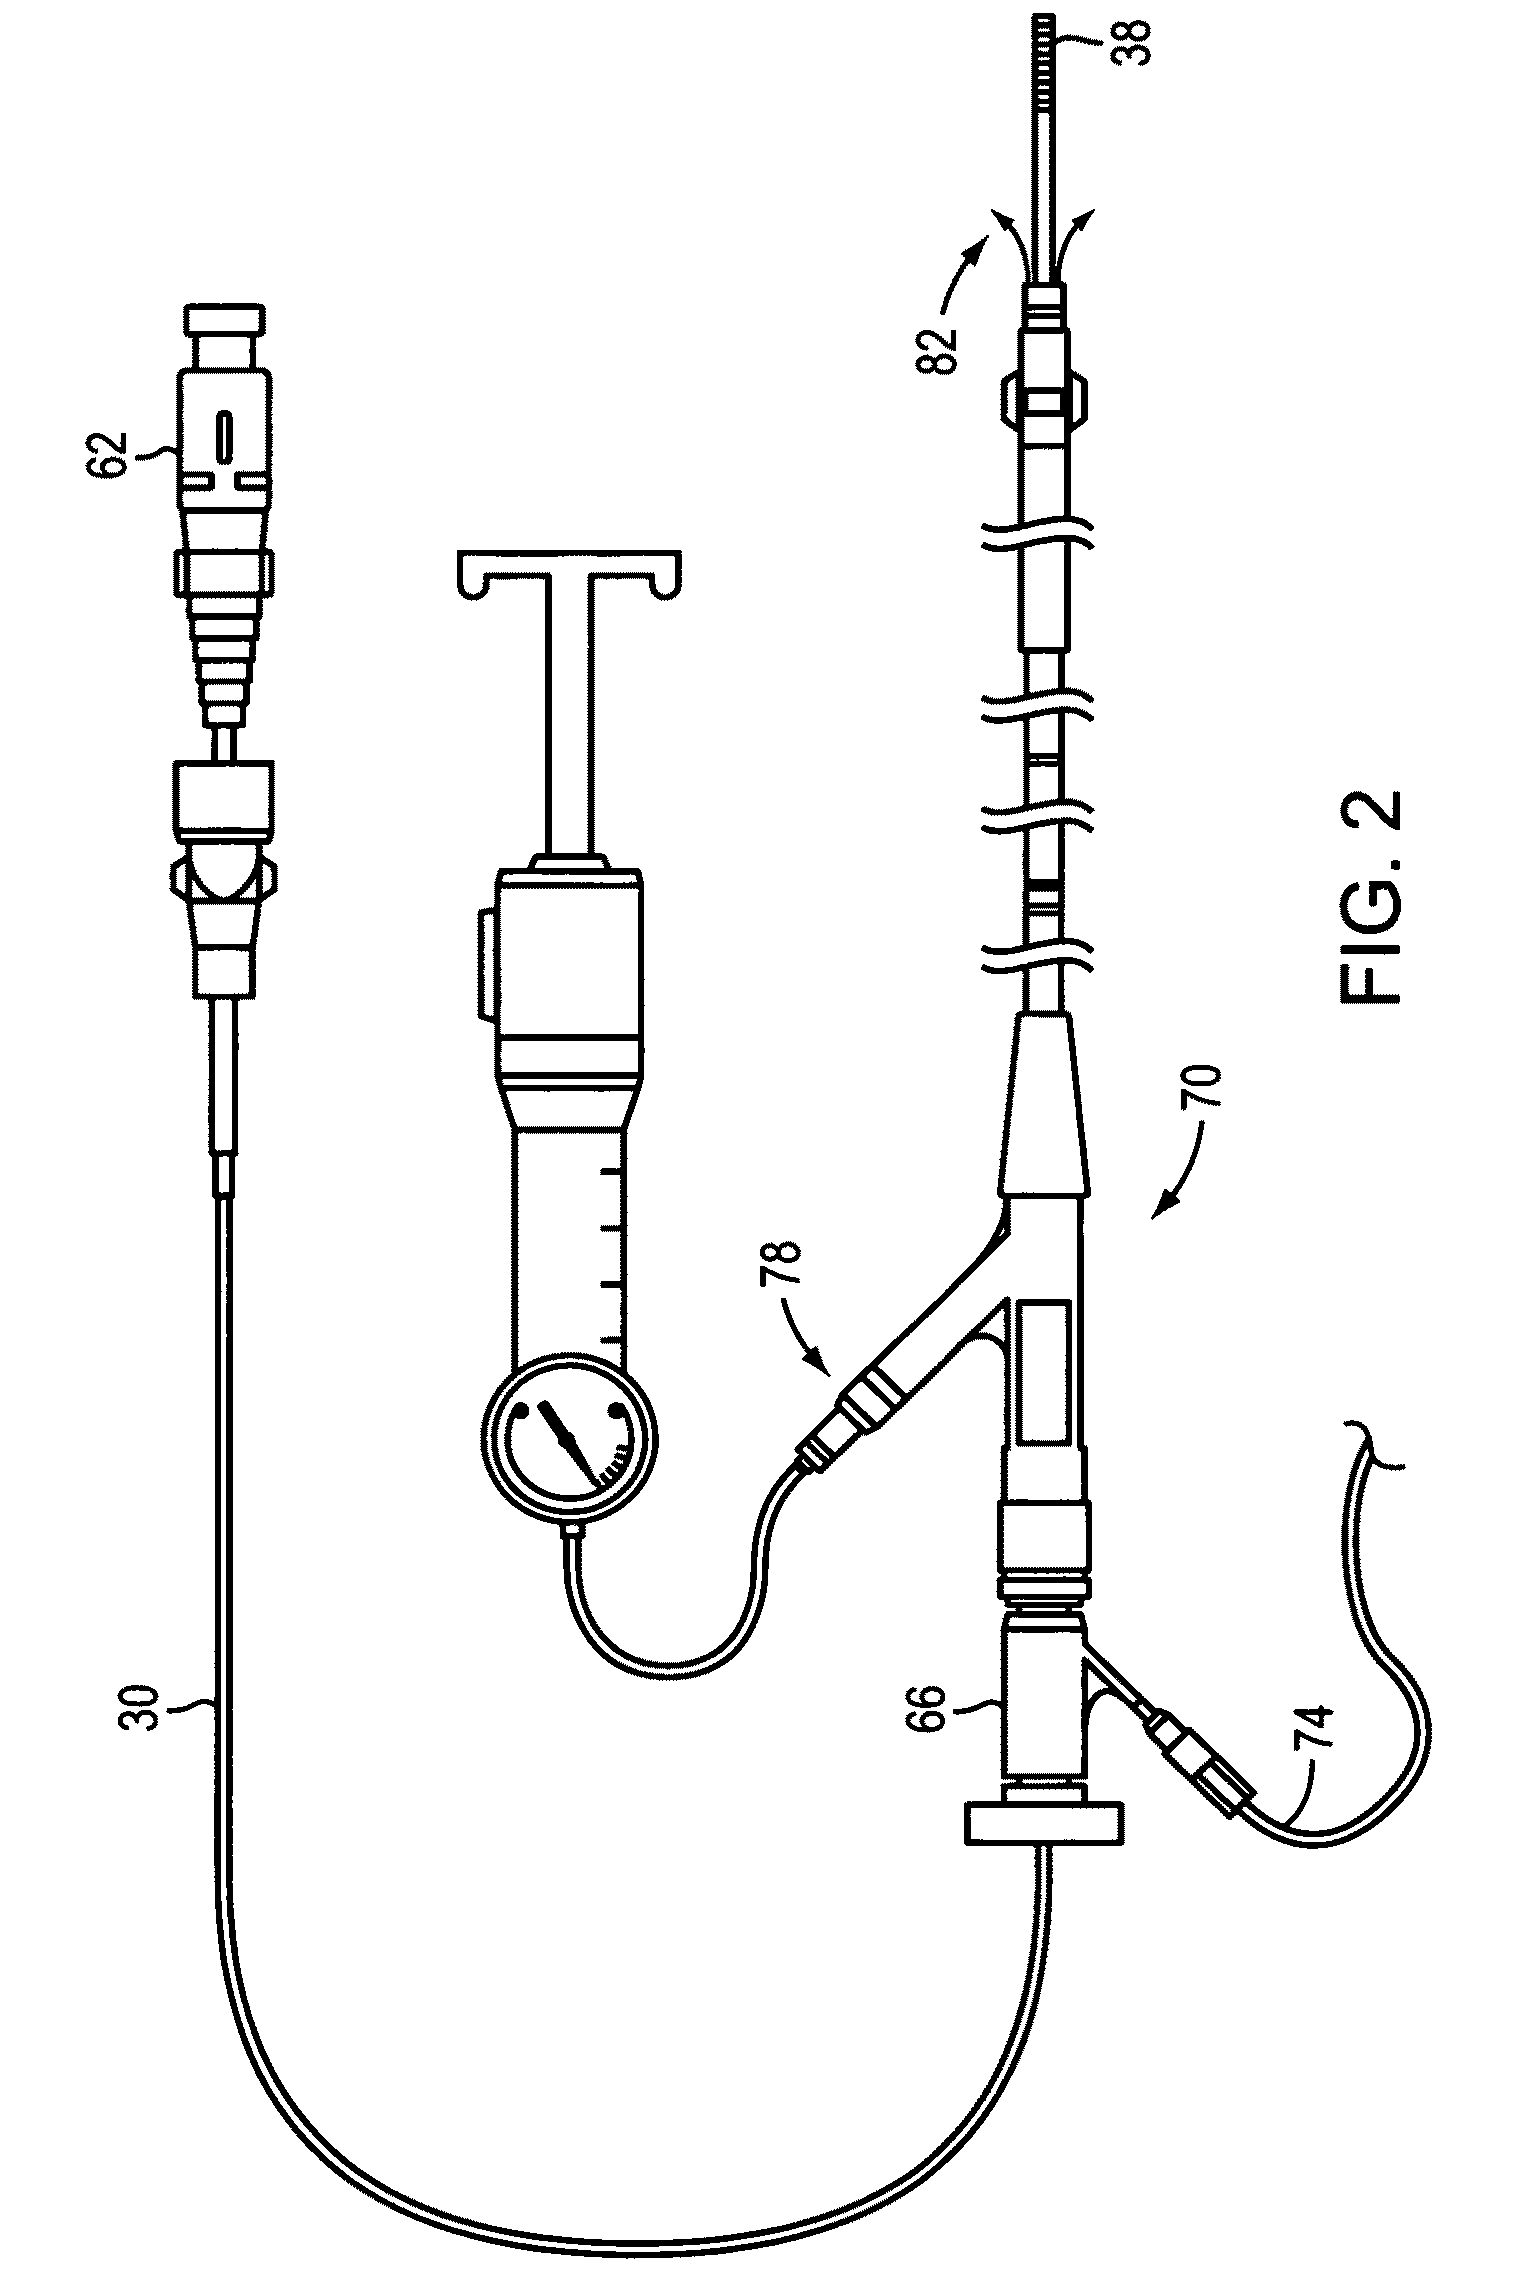 Imaging catheter with integrated reference reflector